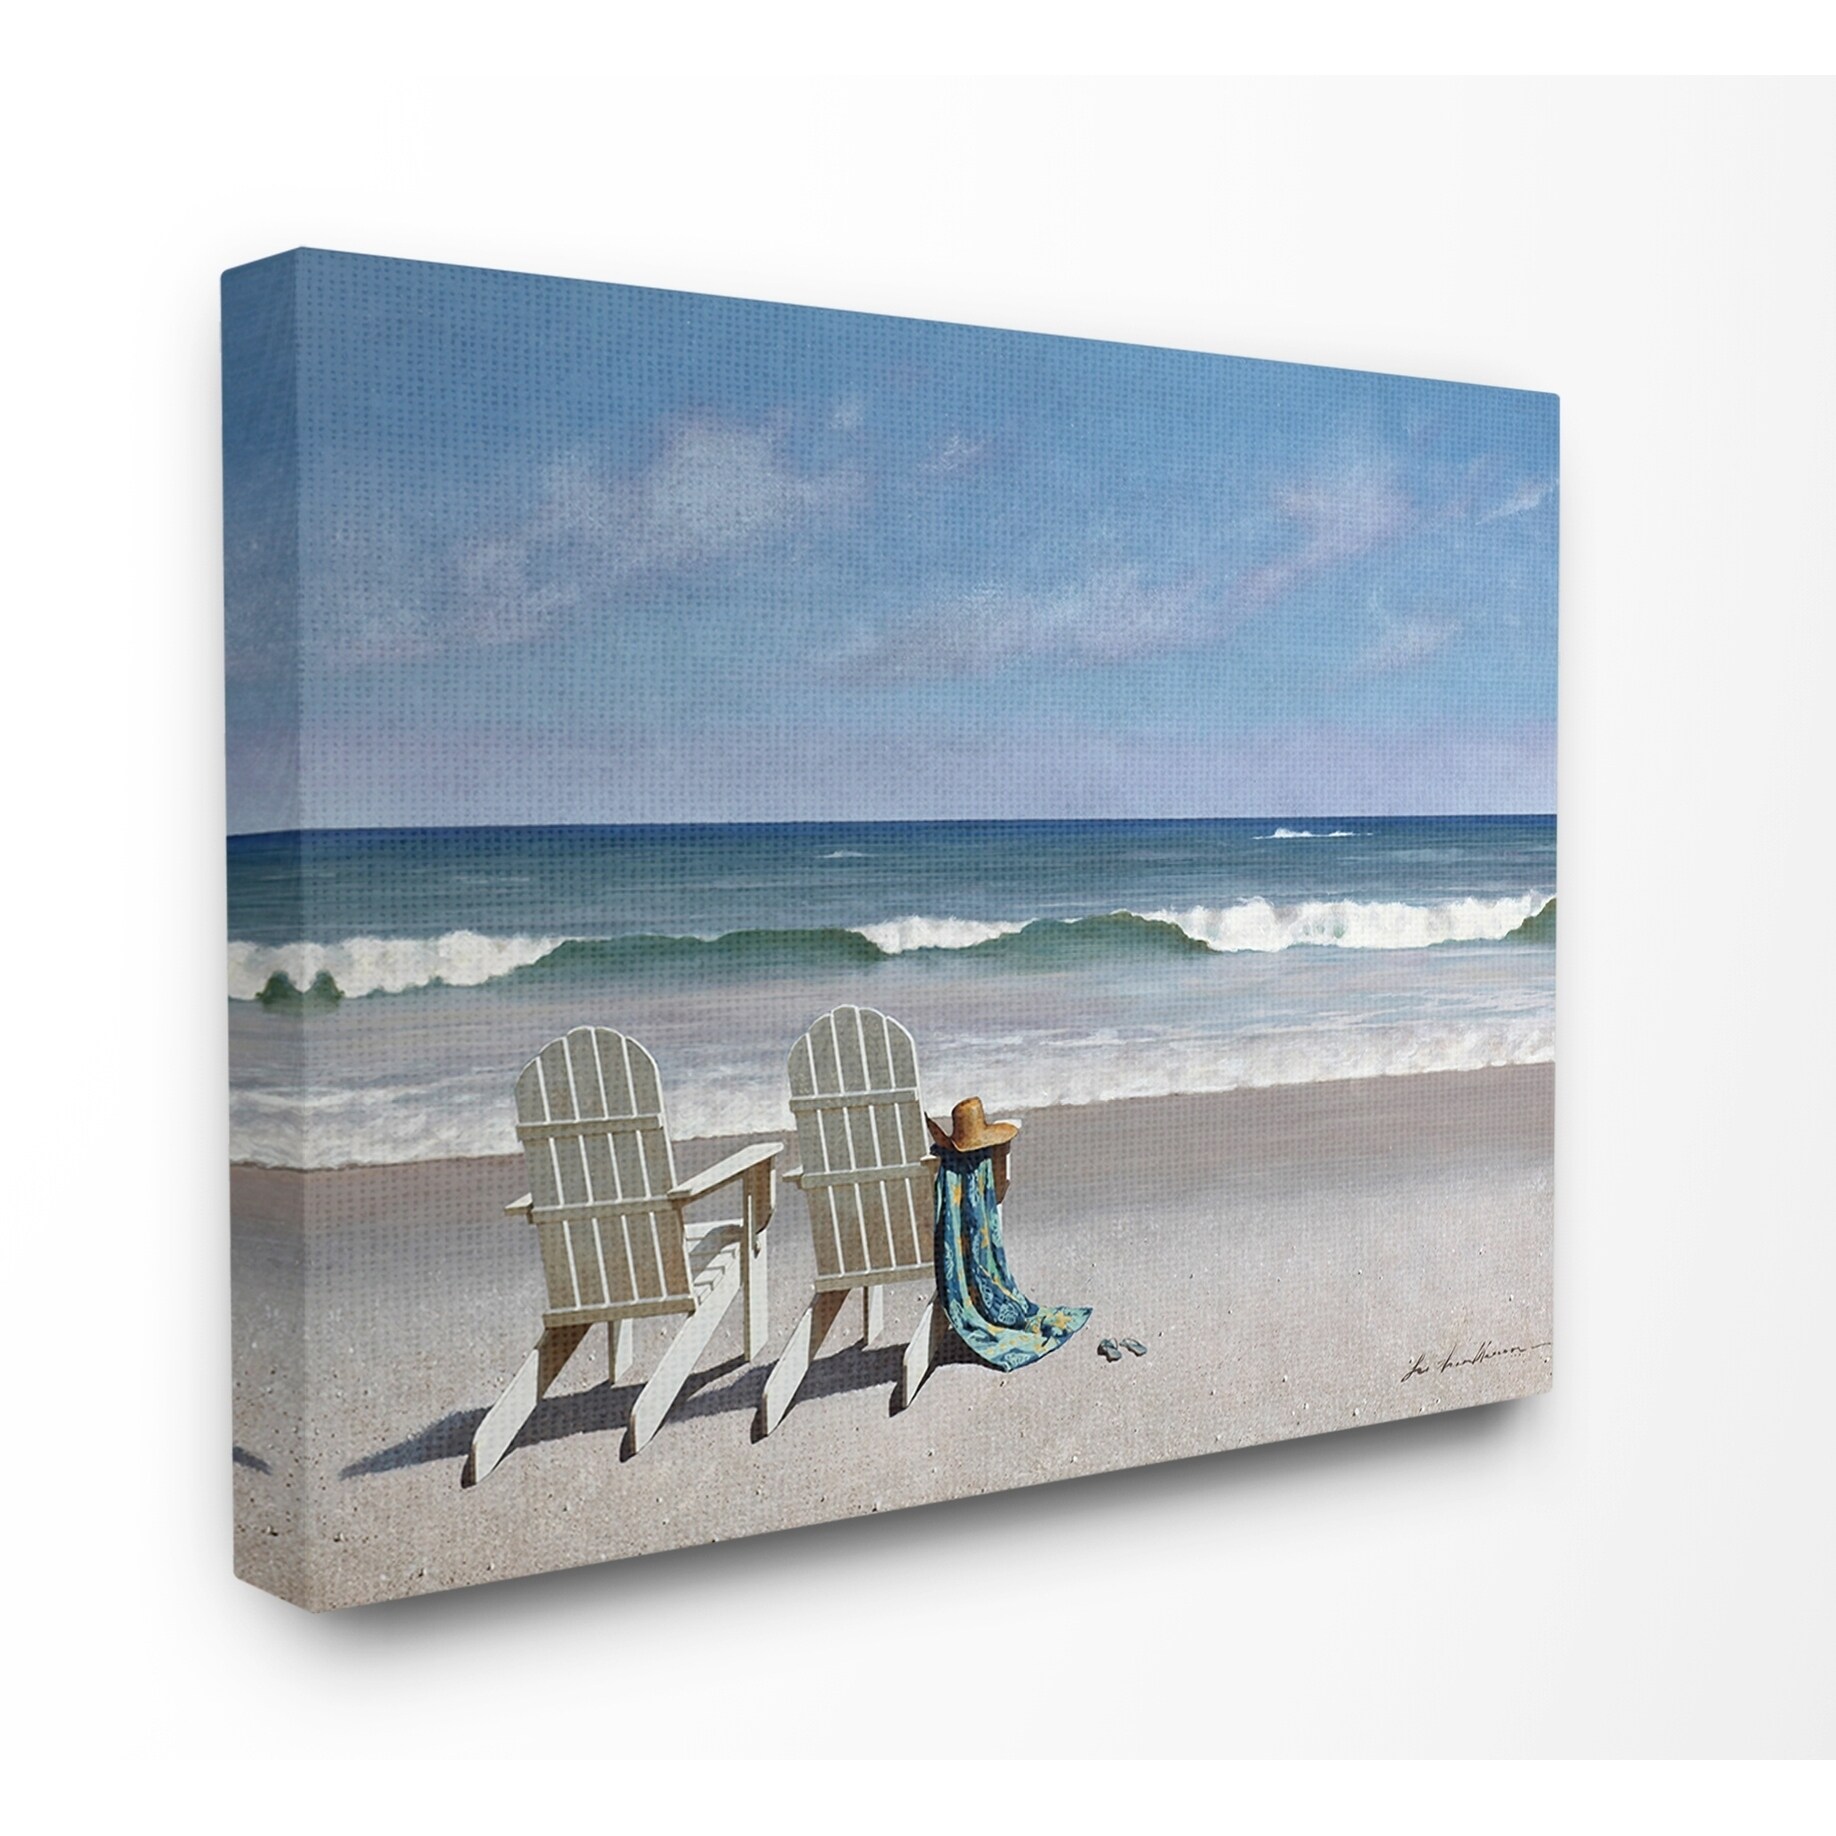 Shop The Stupell Home Decor Two White Adirondack Chairs On The Beach Canvas Wall Art 16 X 20 Proudly Made In Usa Multi Color Overstock 26890426